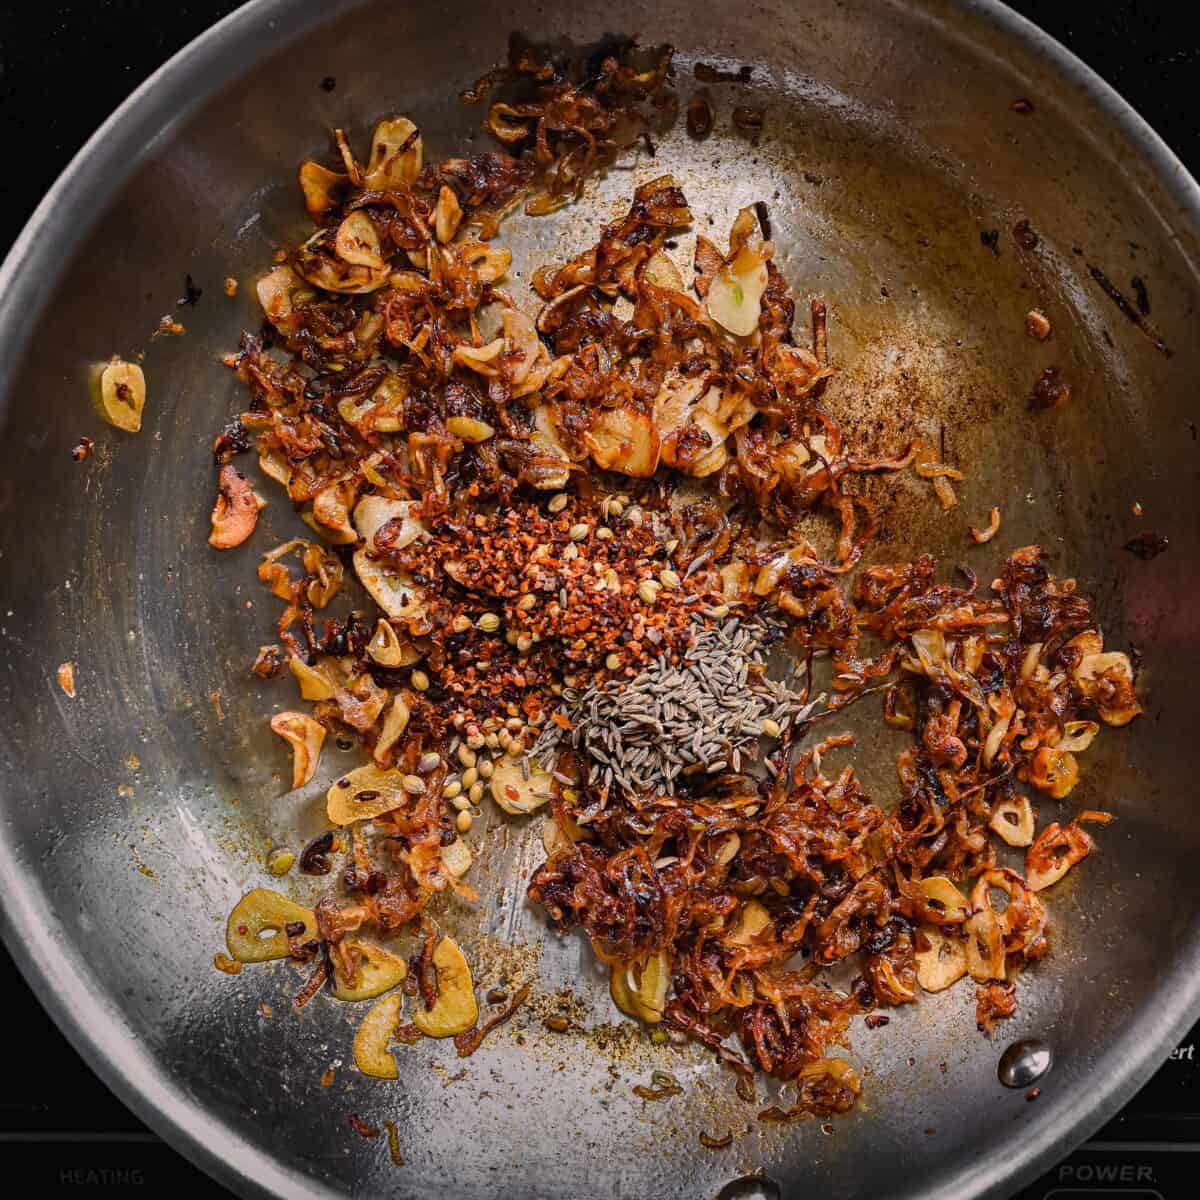 cumin and coriander seeds and chili flakes with caramelized shallots and garlic in skillet